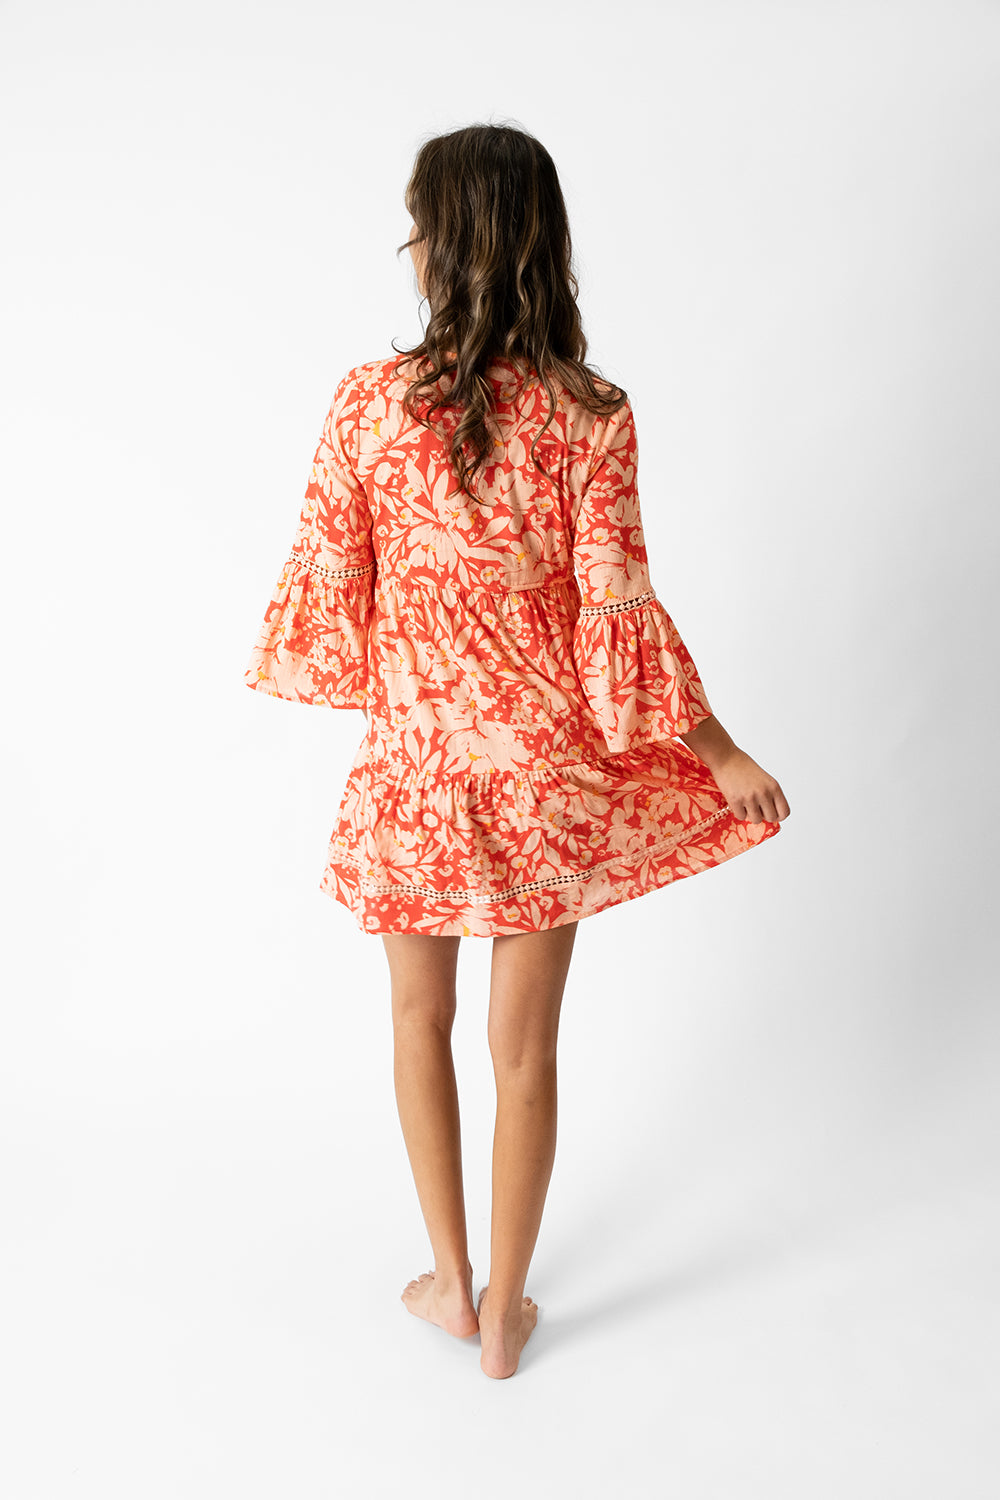 Valencia Tiered Bell Sleeve Dress in pink floral print 